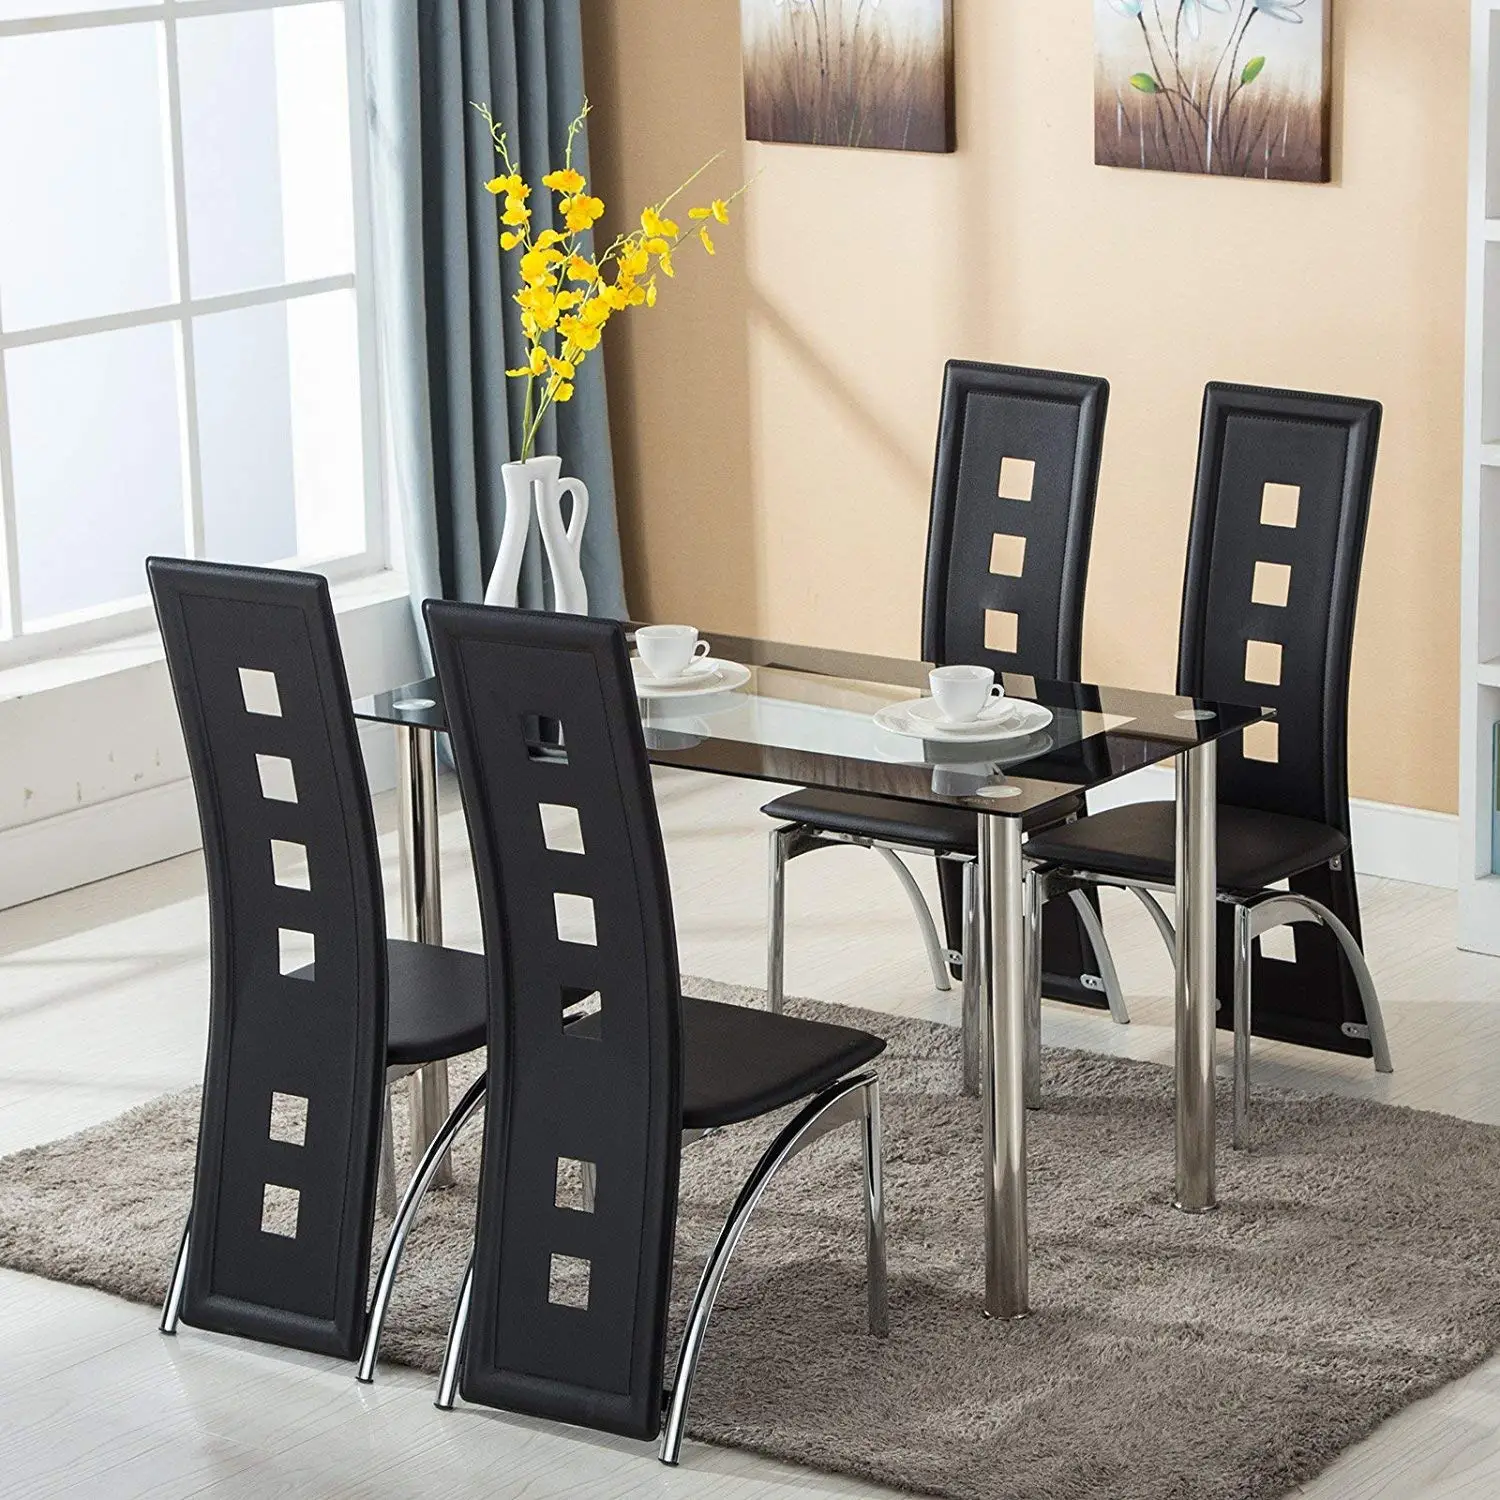 Factory Price Heavy Duty Dining Tables Set Glass Top Table And 4 Leather Chairs Kitchen Furniture Buy Leather Kitchen Furniture Dining Room Furniture Glass Dining Table Product On Alibaba Com